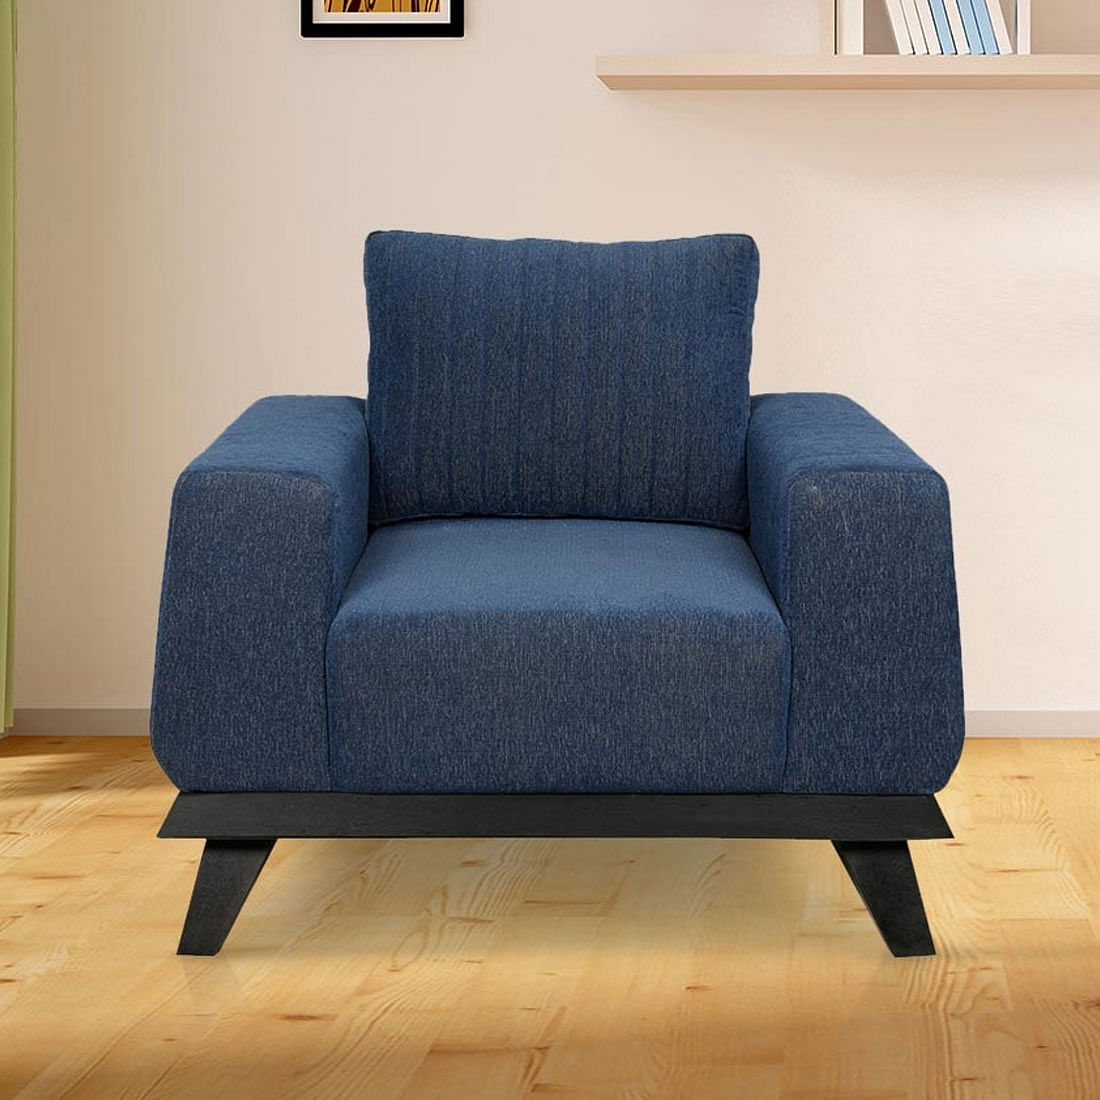 Bladen Solid Wood Single Seater Sofa in Blue Colour